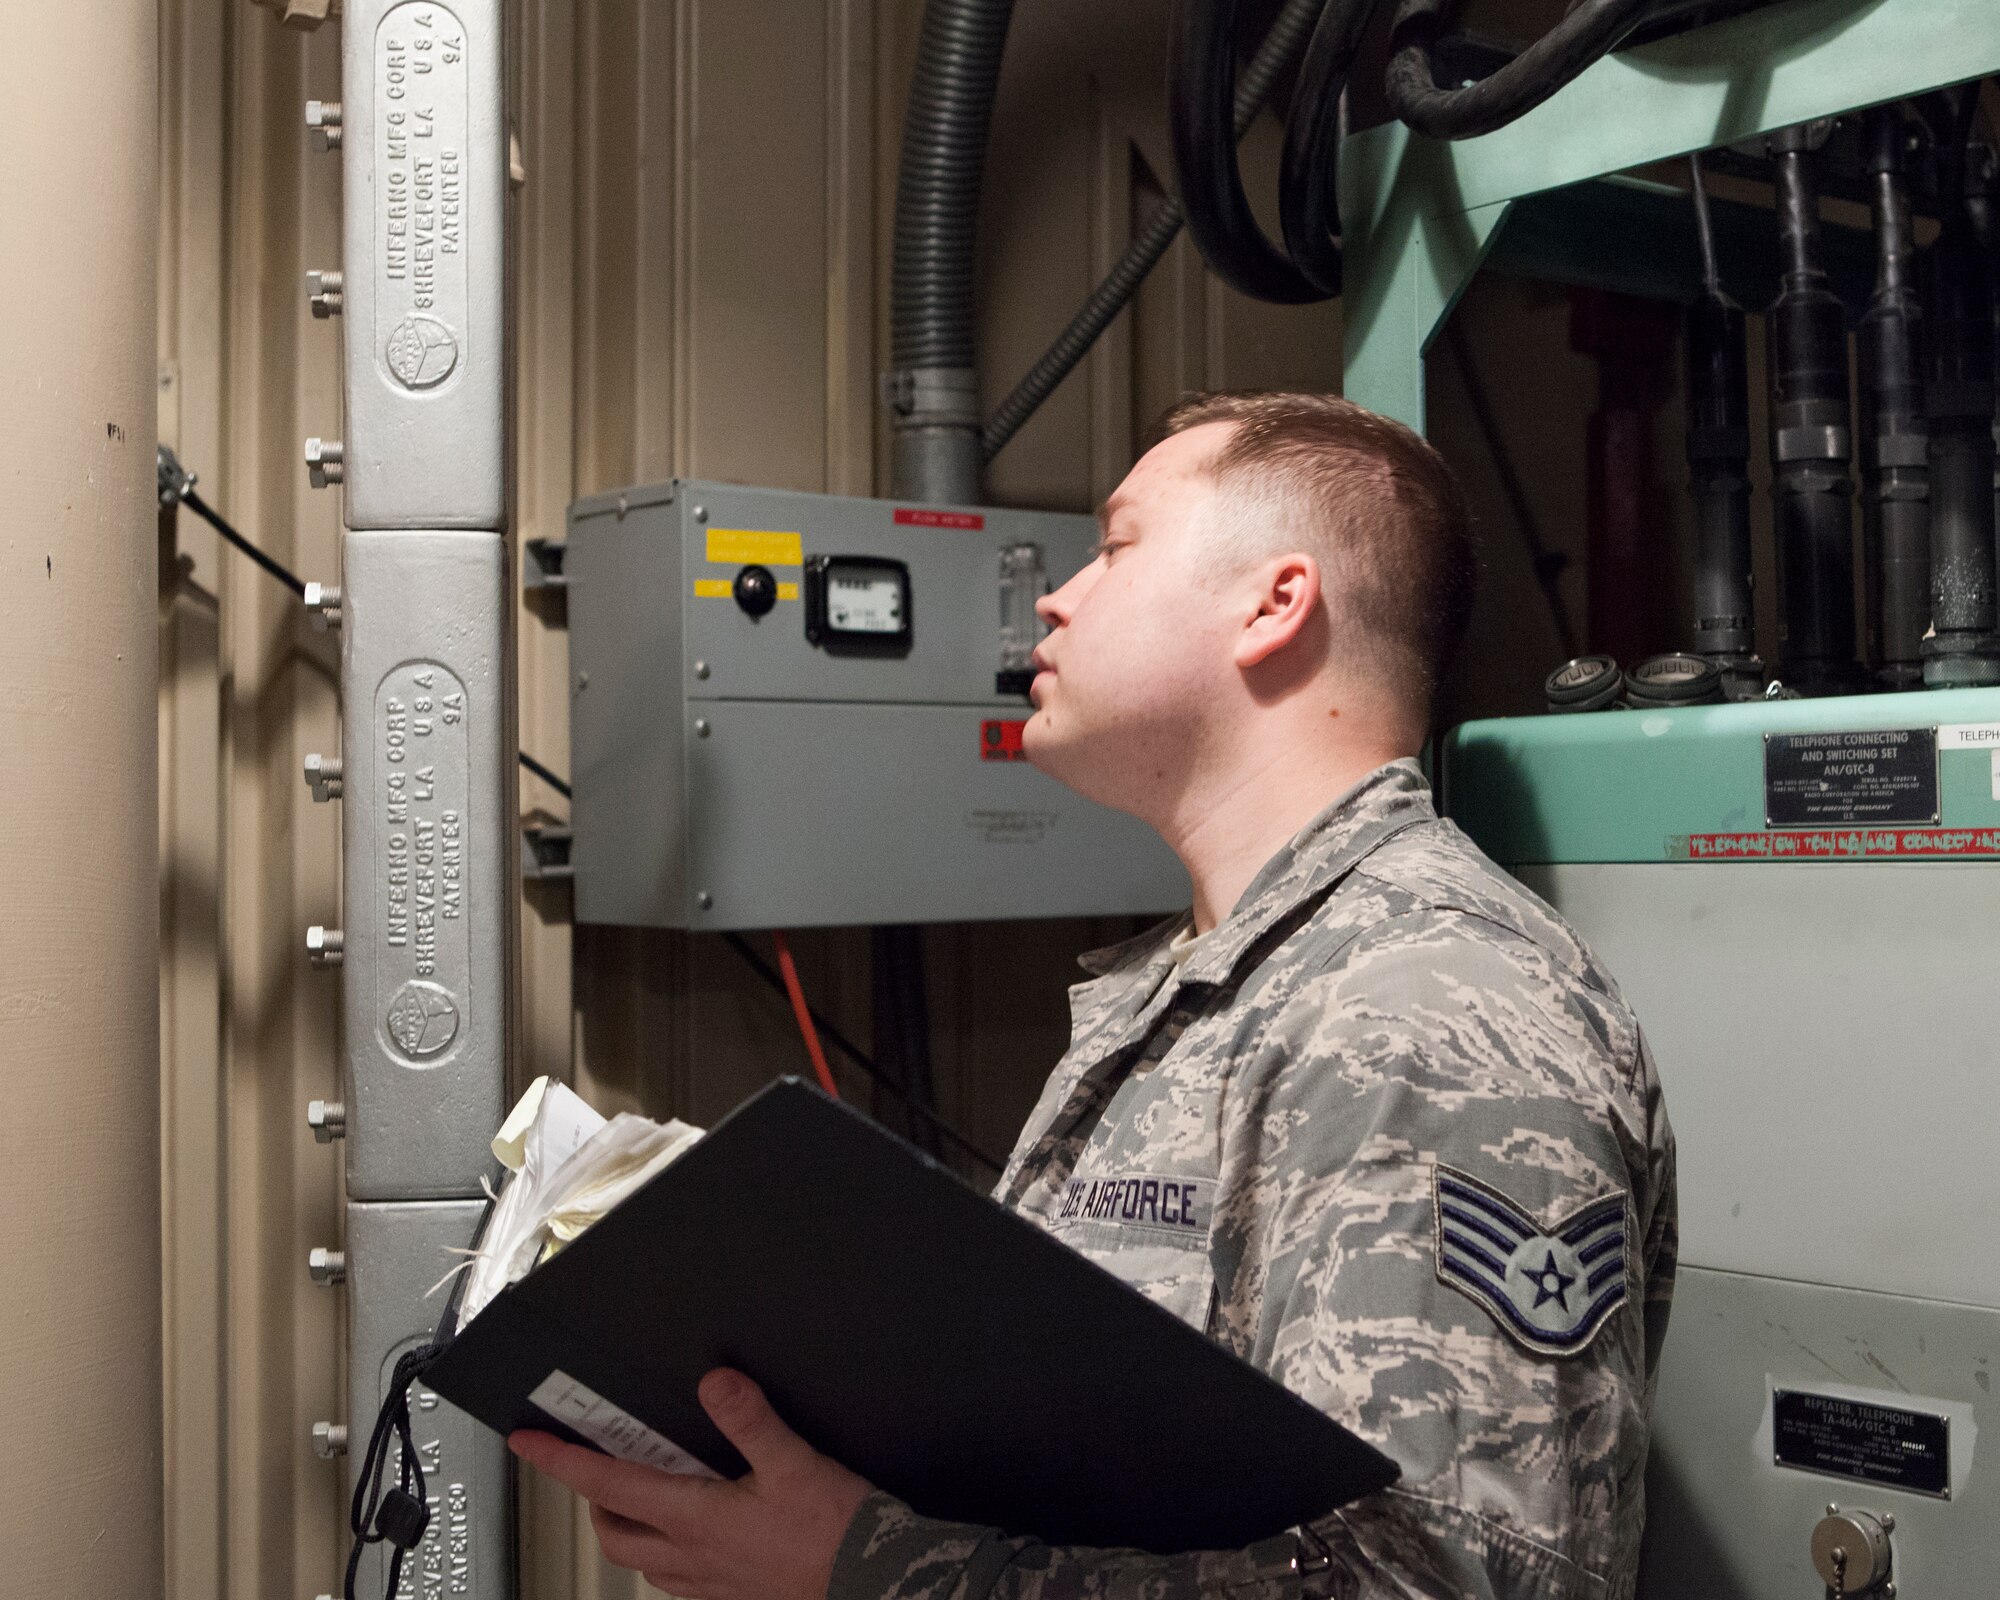 Staff Sgt. Jerimiah Jensen, 320th Missile Squadron facility manager, conducts a routine maintenance check in the launch control equipment building of a missile alert facility belonging to F.E. Warren Air Force Base, Jan. 28, 2016. Facility managers keep missile alert facilities in operation order for the nuclear deterrent mission. (U.S. Air Force photo by Lan Kim)